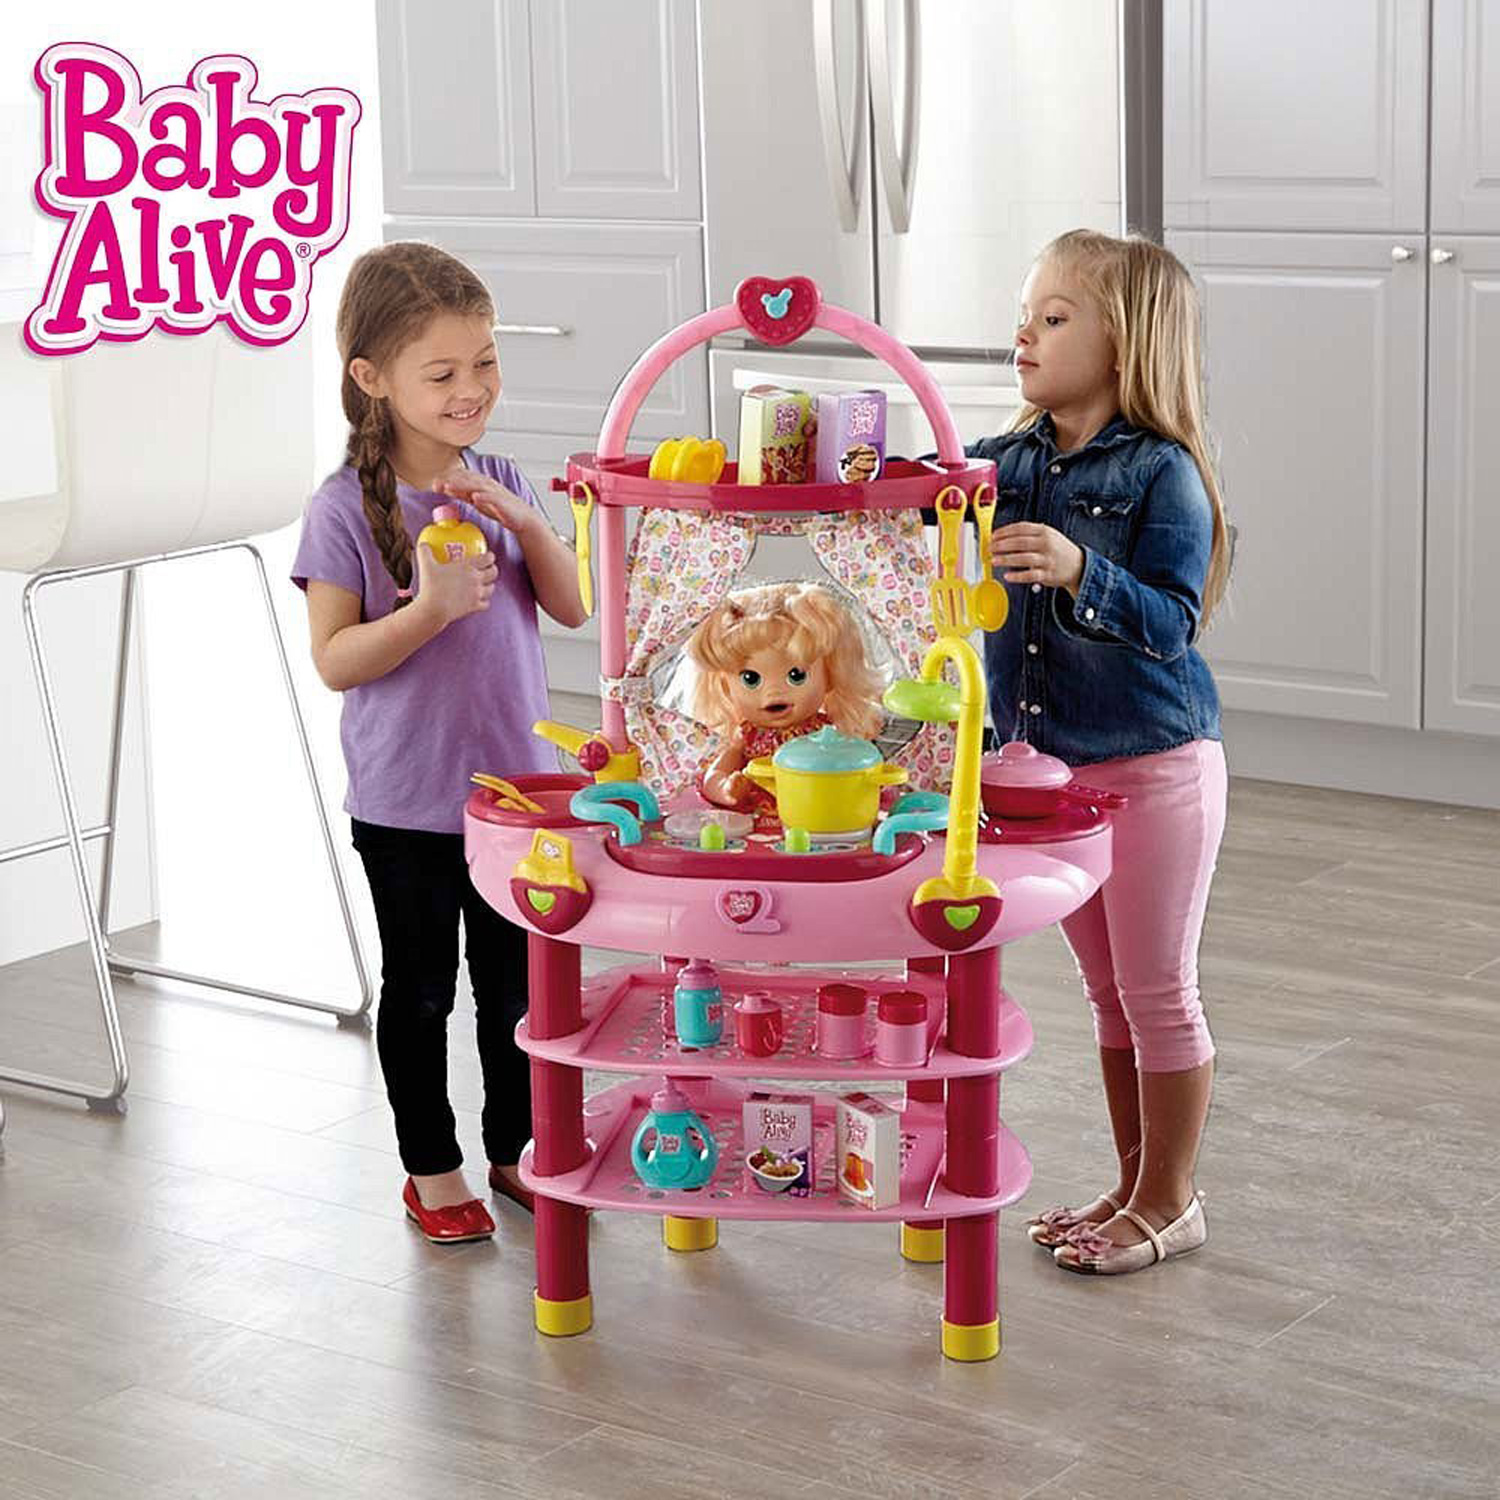 Baby Alive Doll 3 in 1 Cook ?n Care Play Set - image 1 of 8